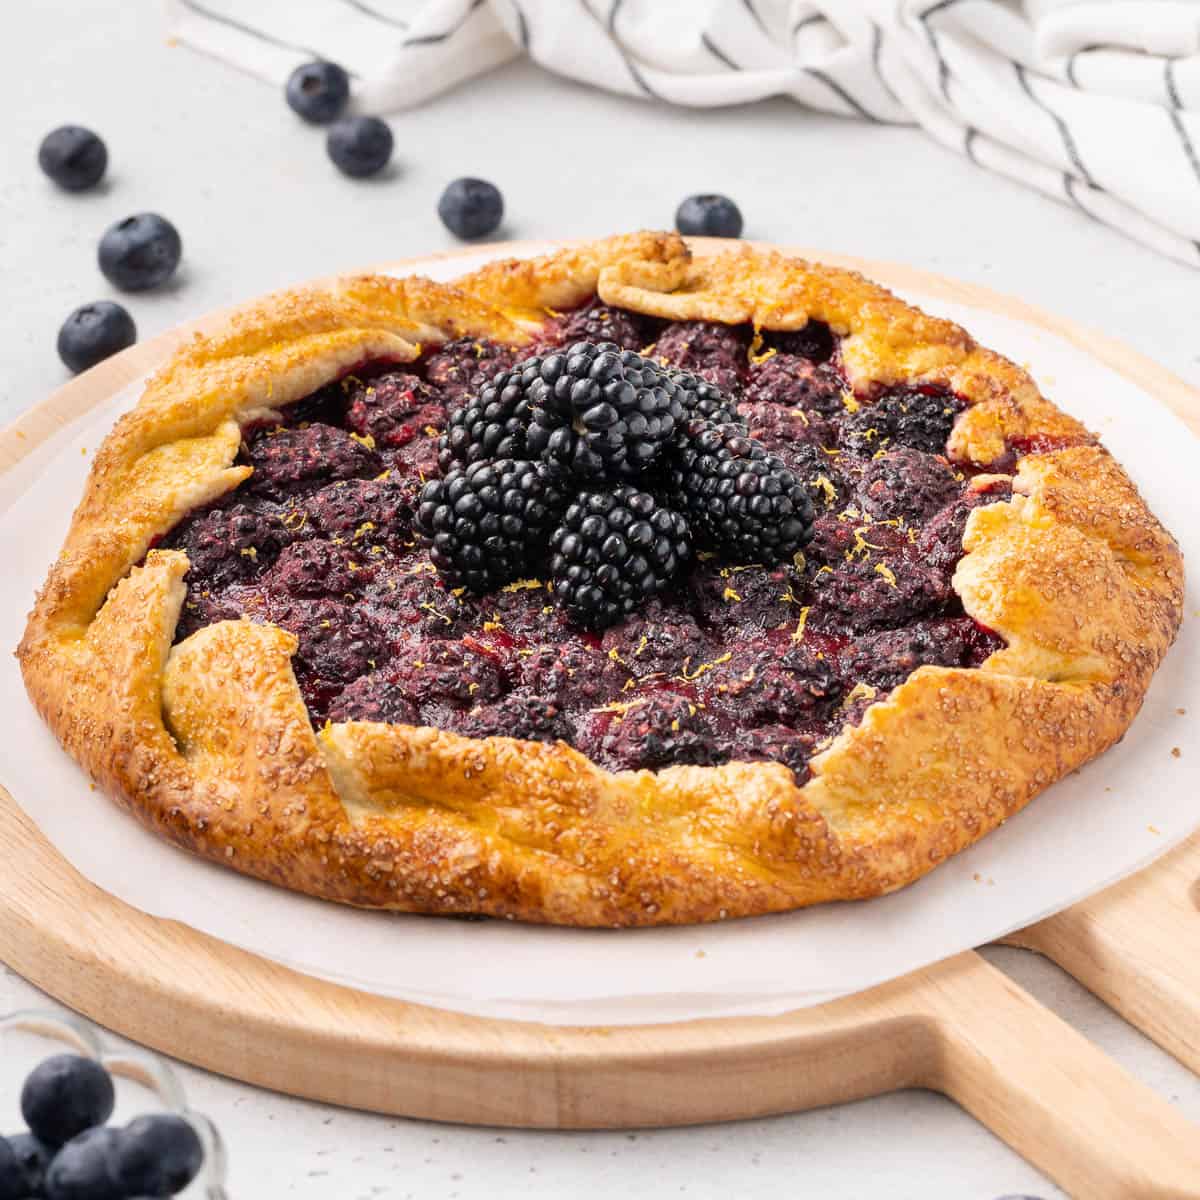 Tart topped with fresh blackberries on a sheet of baking paper over a round wooden board.